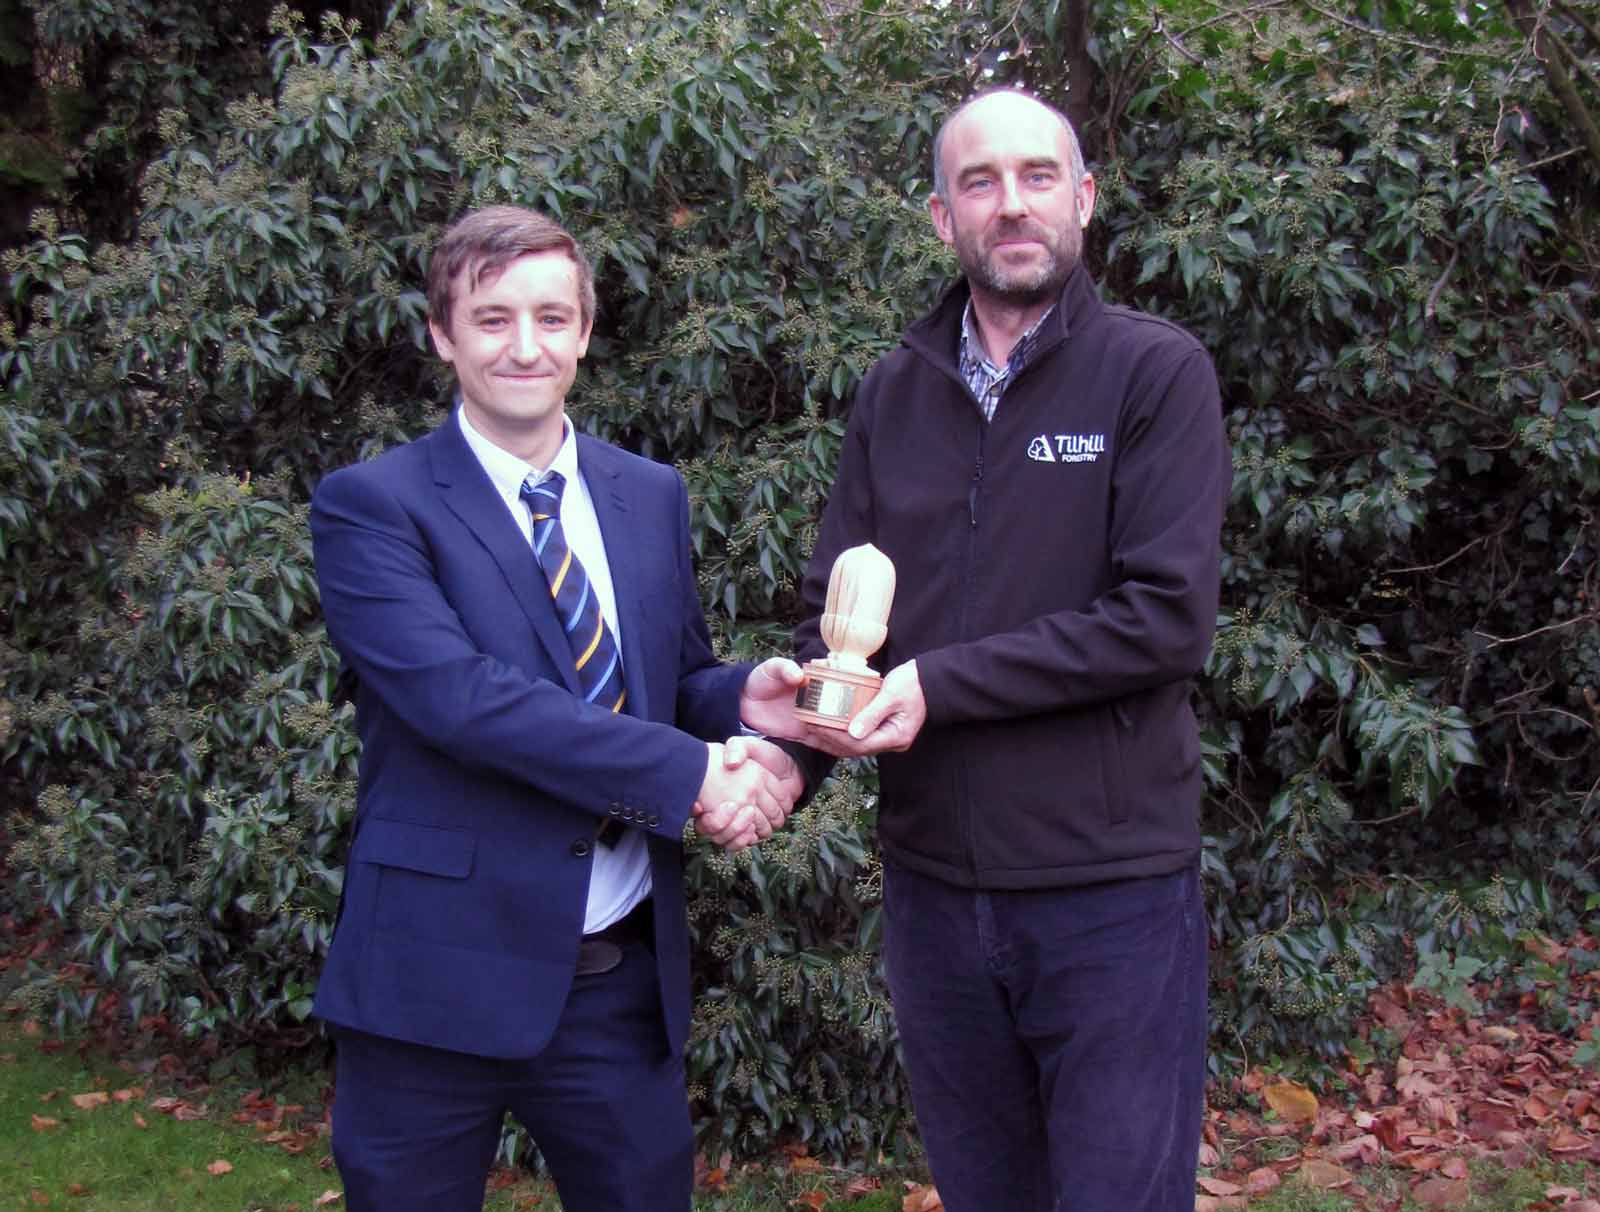 Robin Williams, 31, from Harrogate (North Yorkshire) with Tilhill Forestry District Manager Stuart Pearson